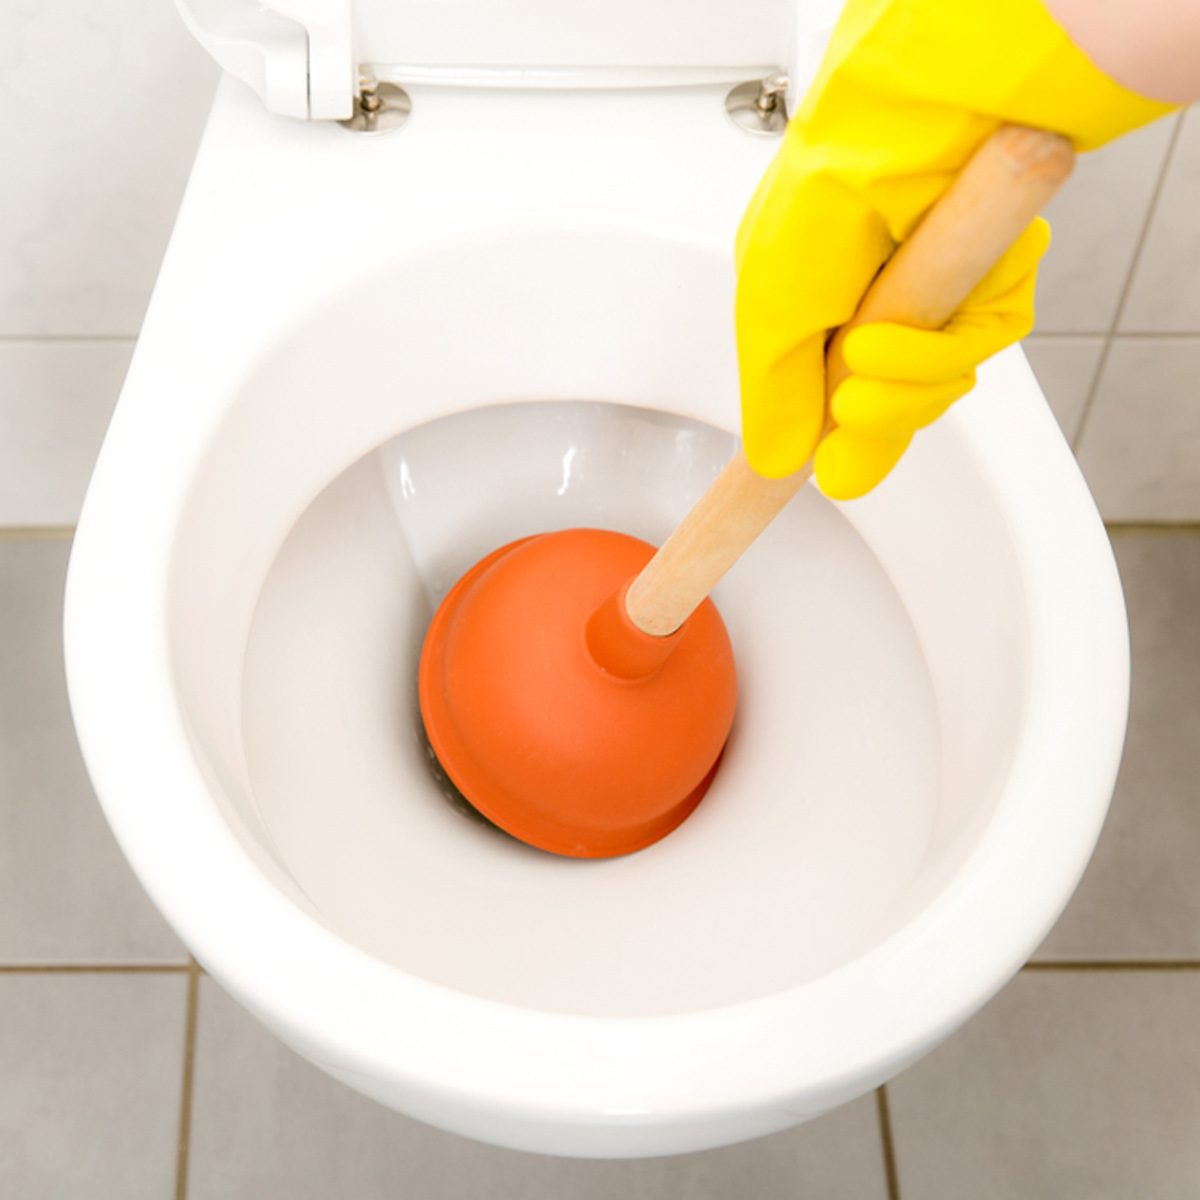 Four Ways to Fix a Clogged Toilet without a Plunger - Alpha Plumbing